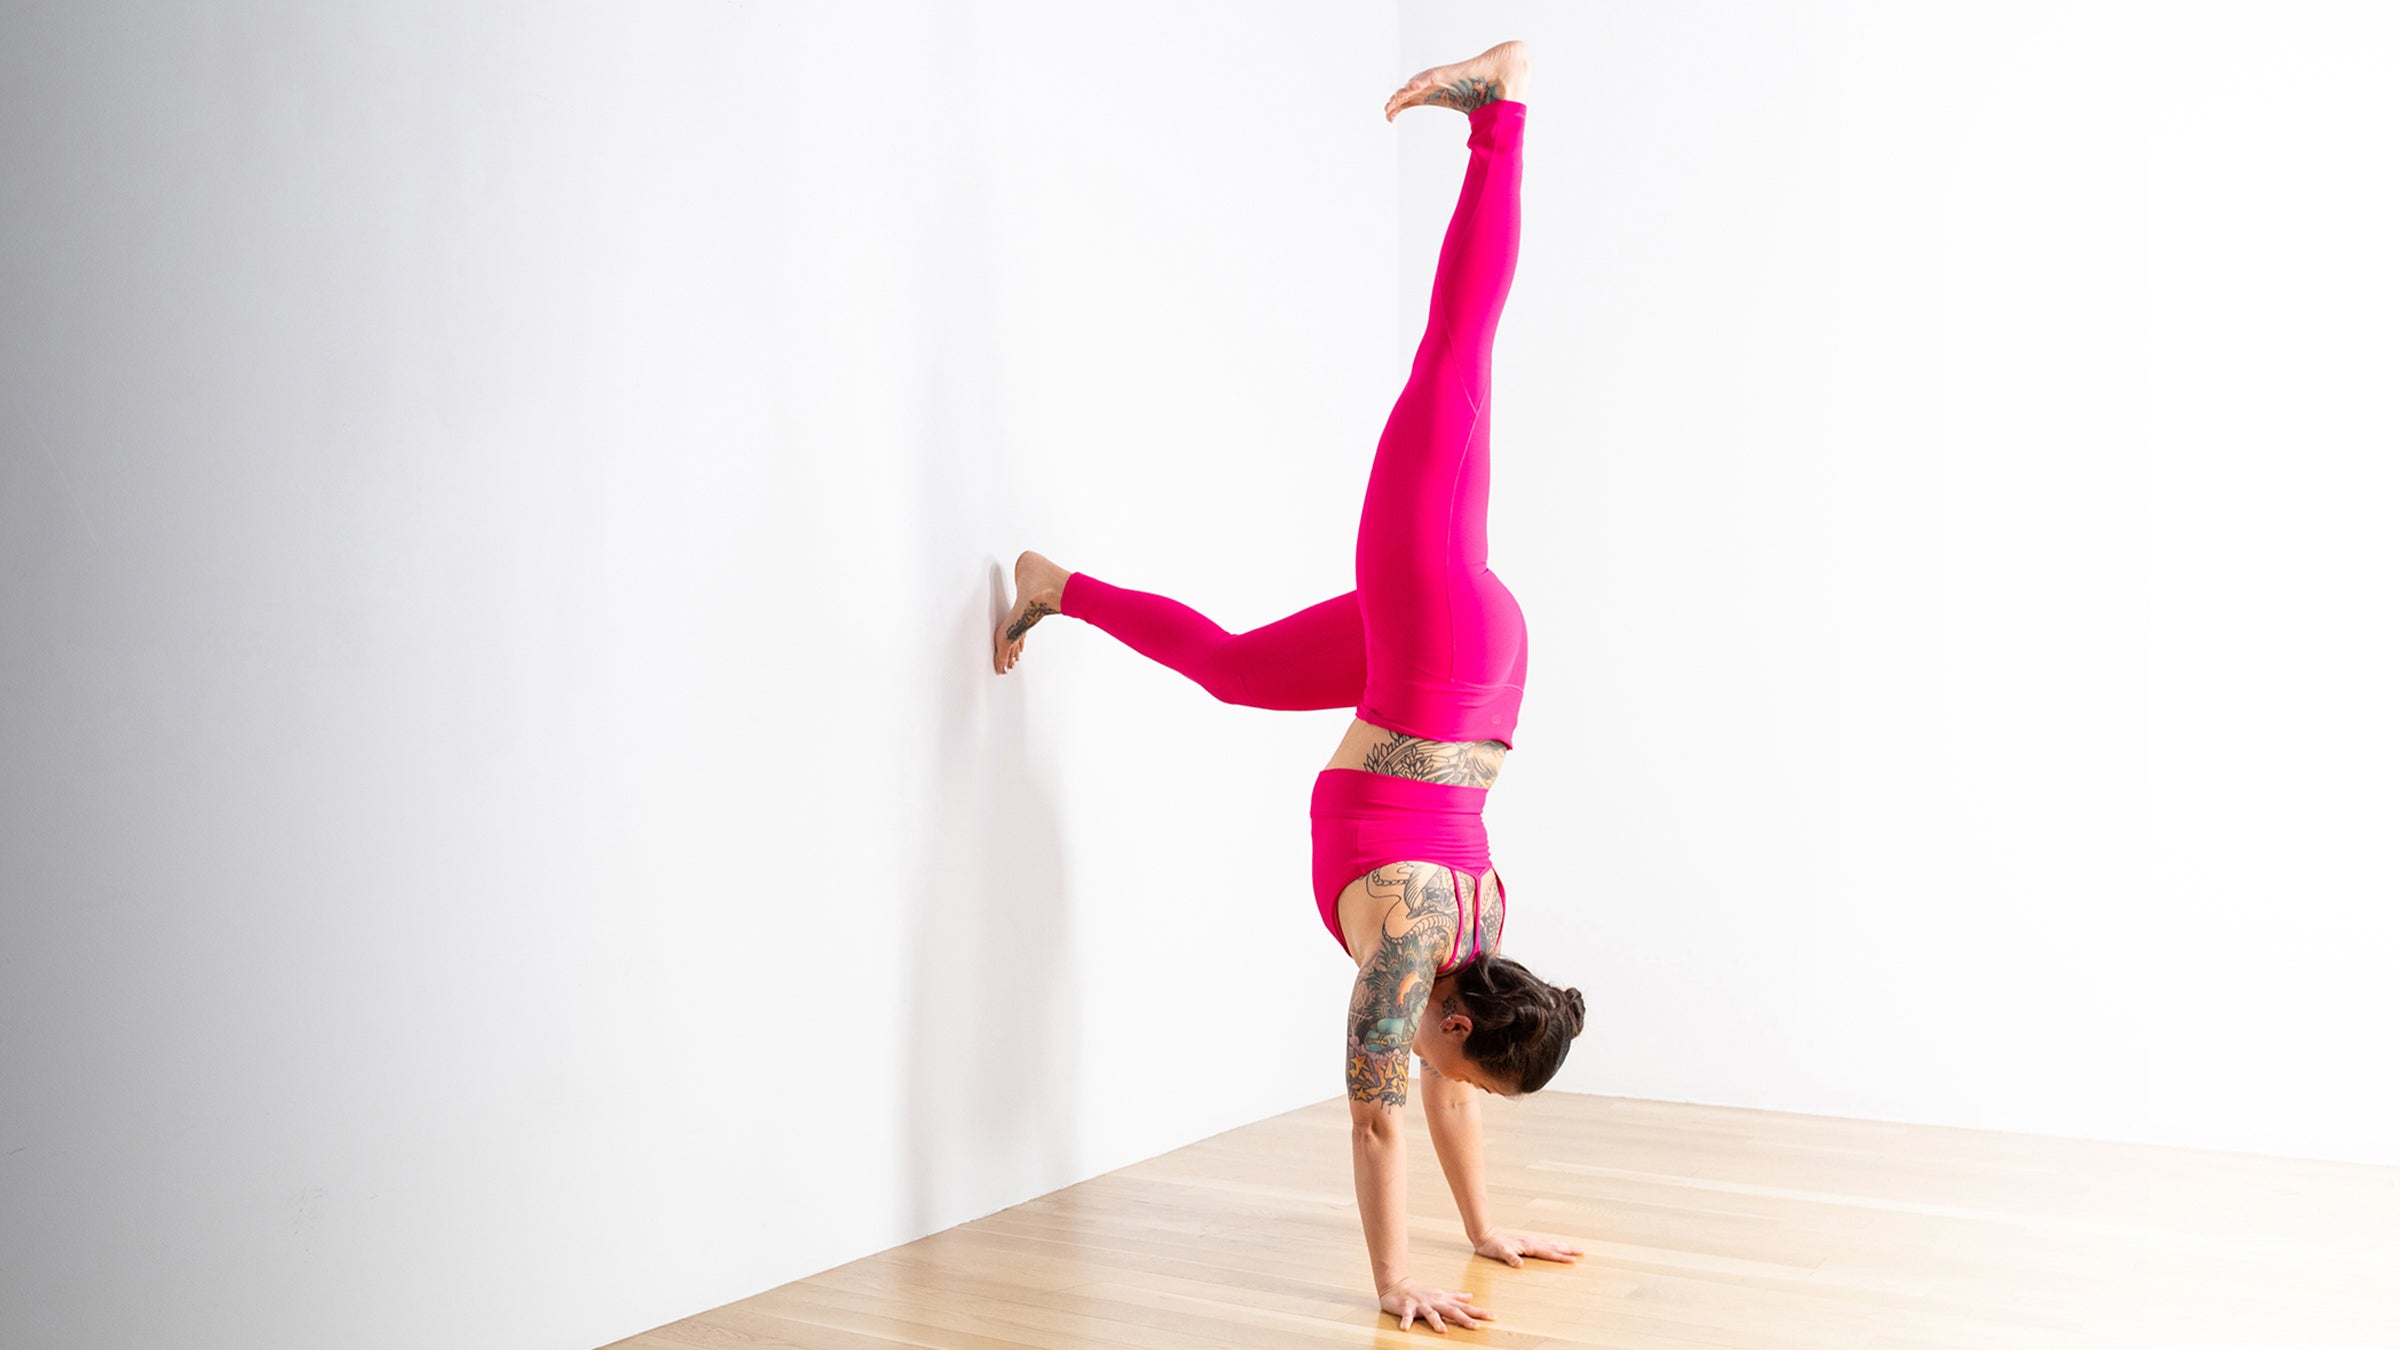 A Sequence to Learn How to Do Handstand - Sonima